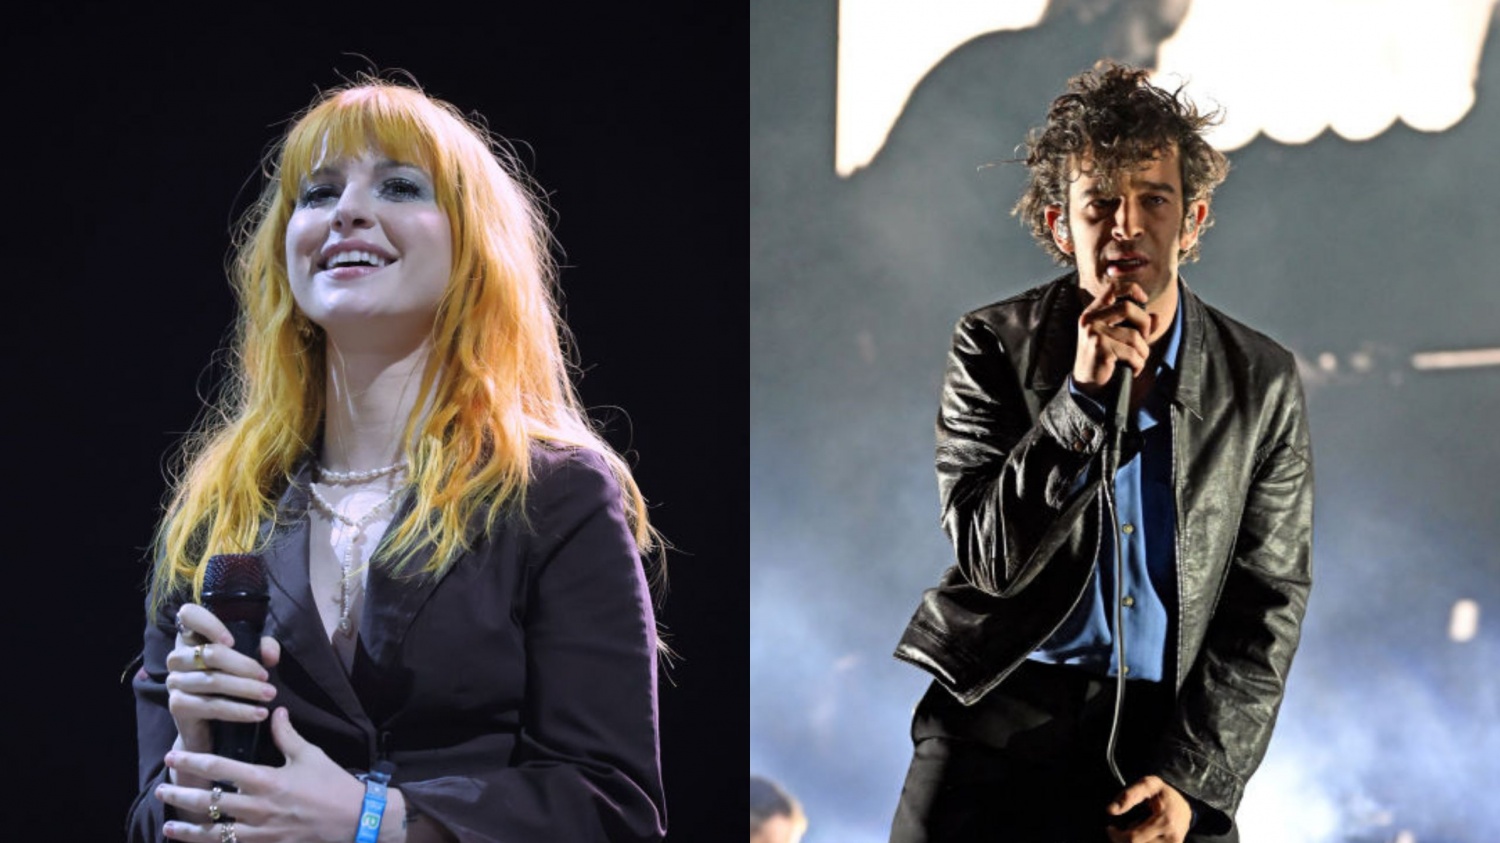 Hayley Williams of Paramore, Matty Healy of The 1975